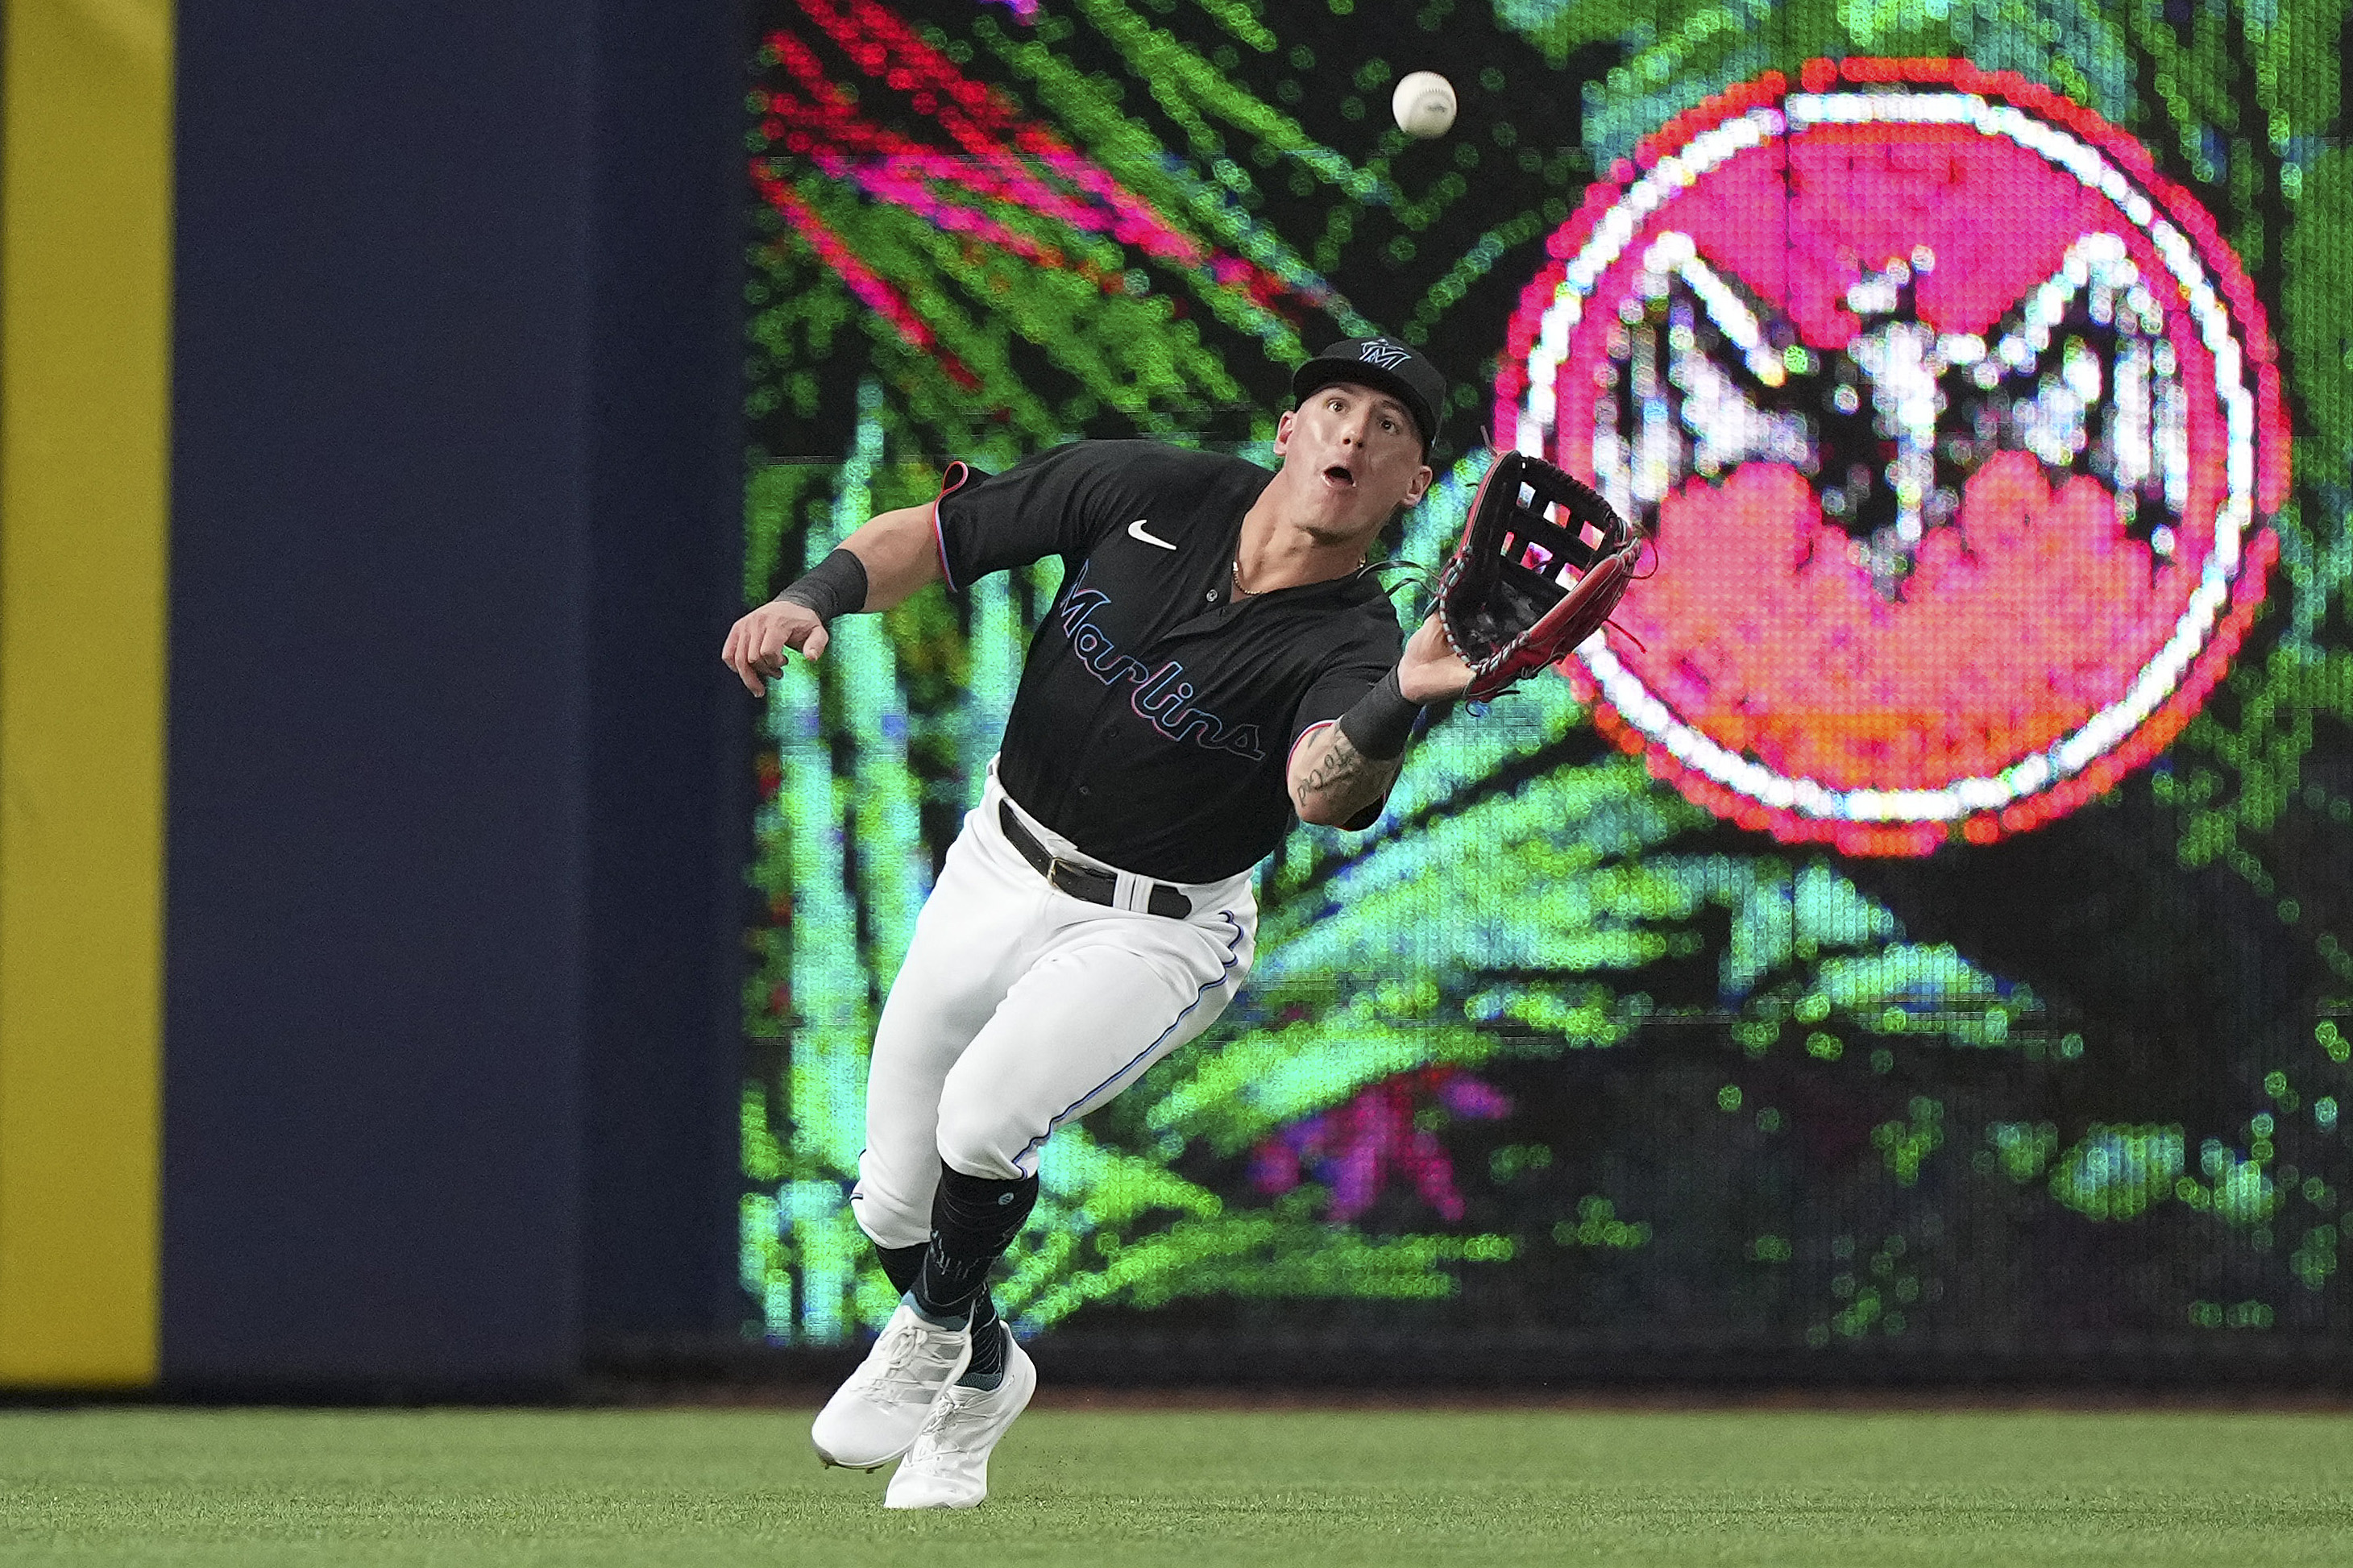 Peyton Burdick #86 of the Miami Marlins catches a fly ball during the fourth inning against the Los Angeles Dodgers at loanDepot park on August 26, 2022 in Miami, Florida.